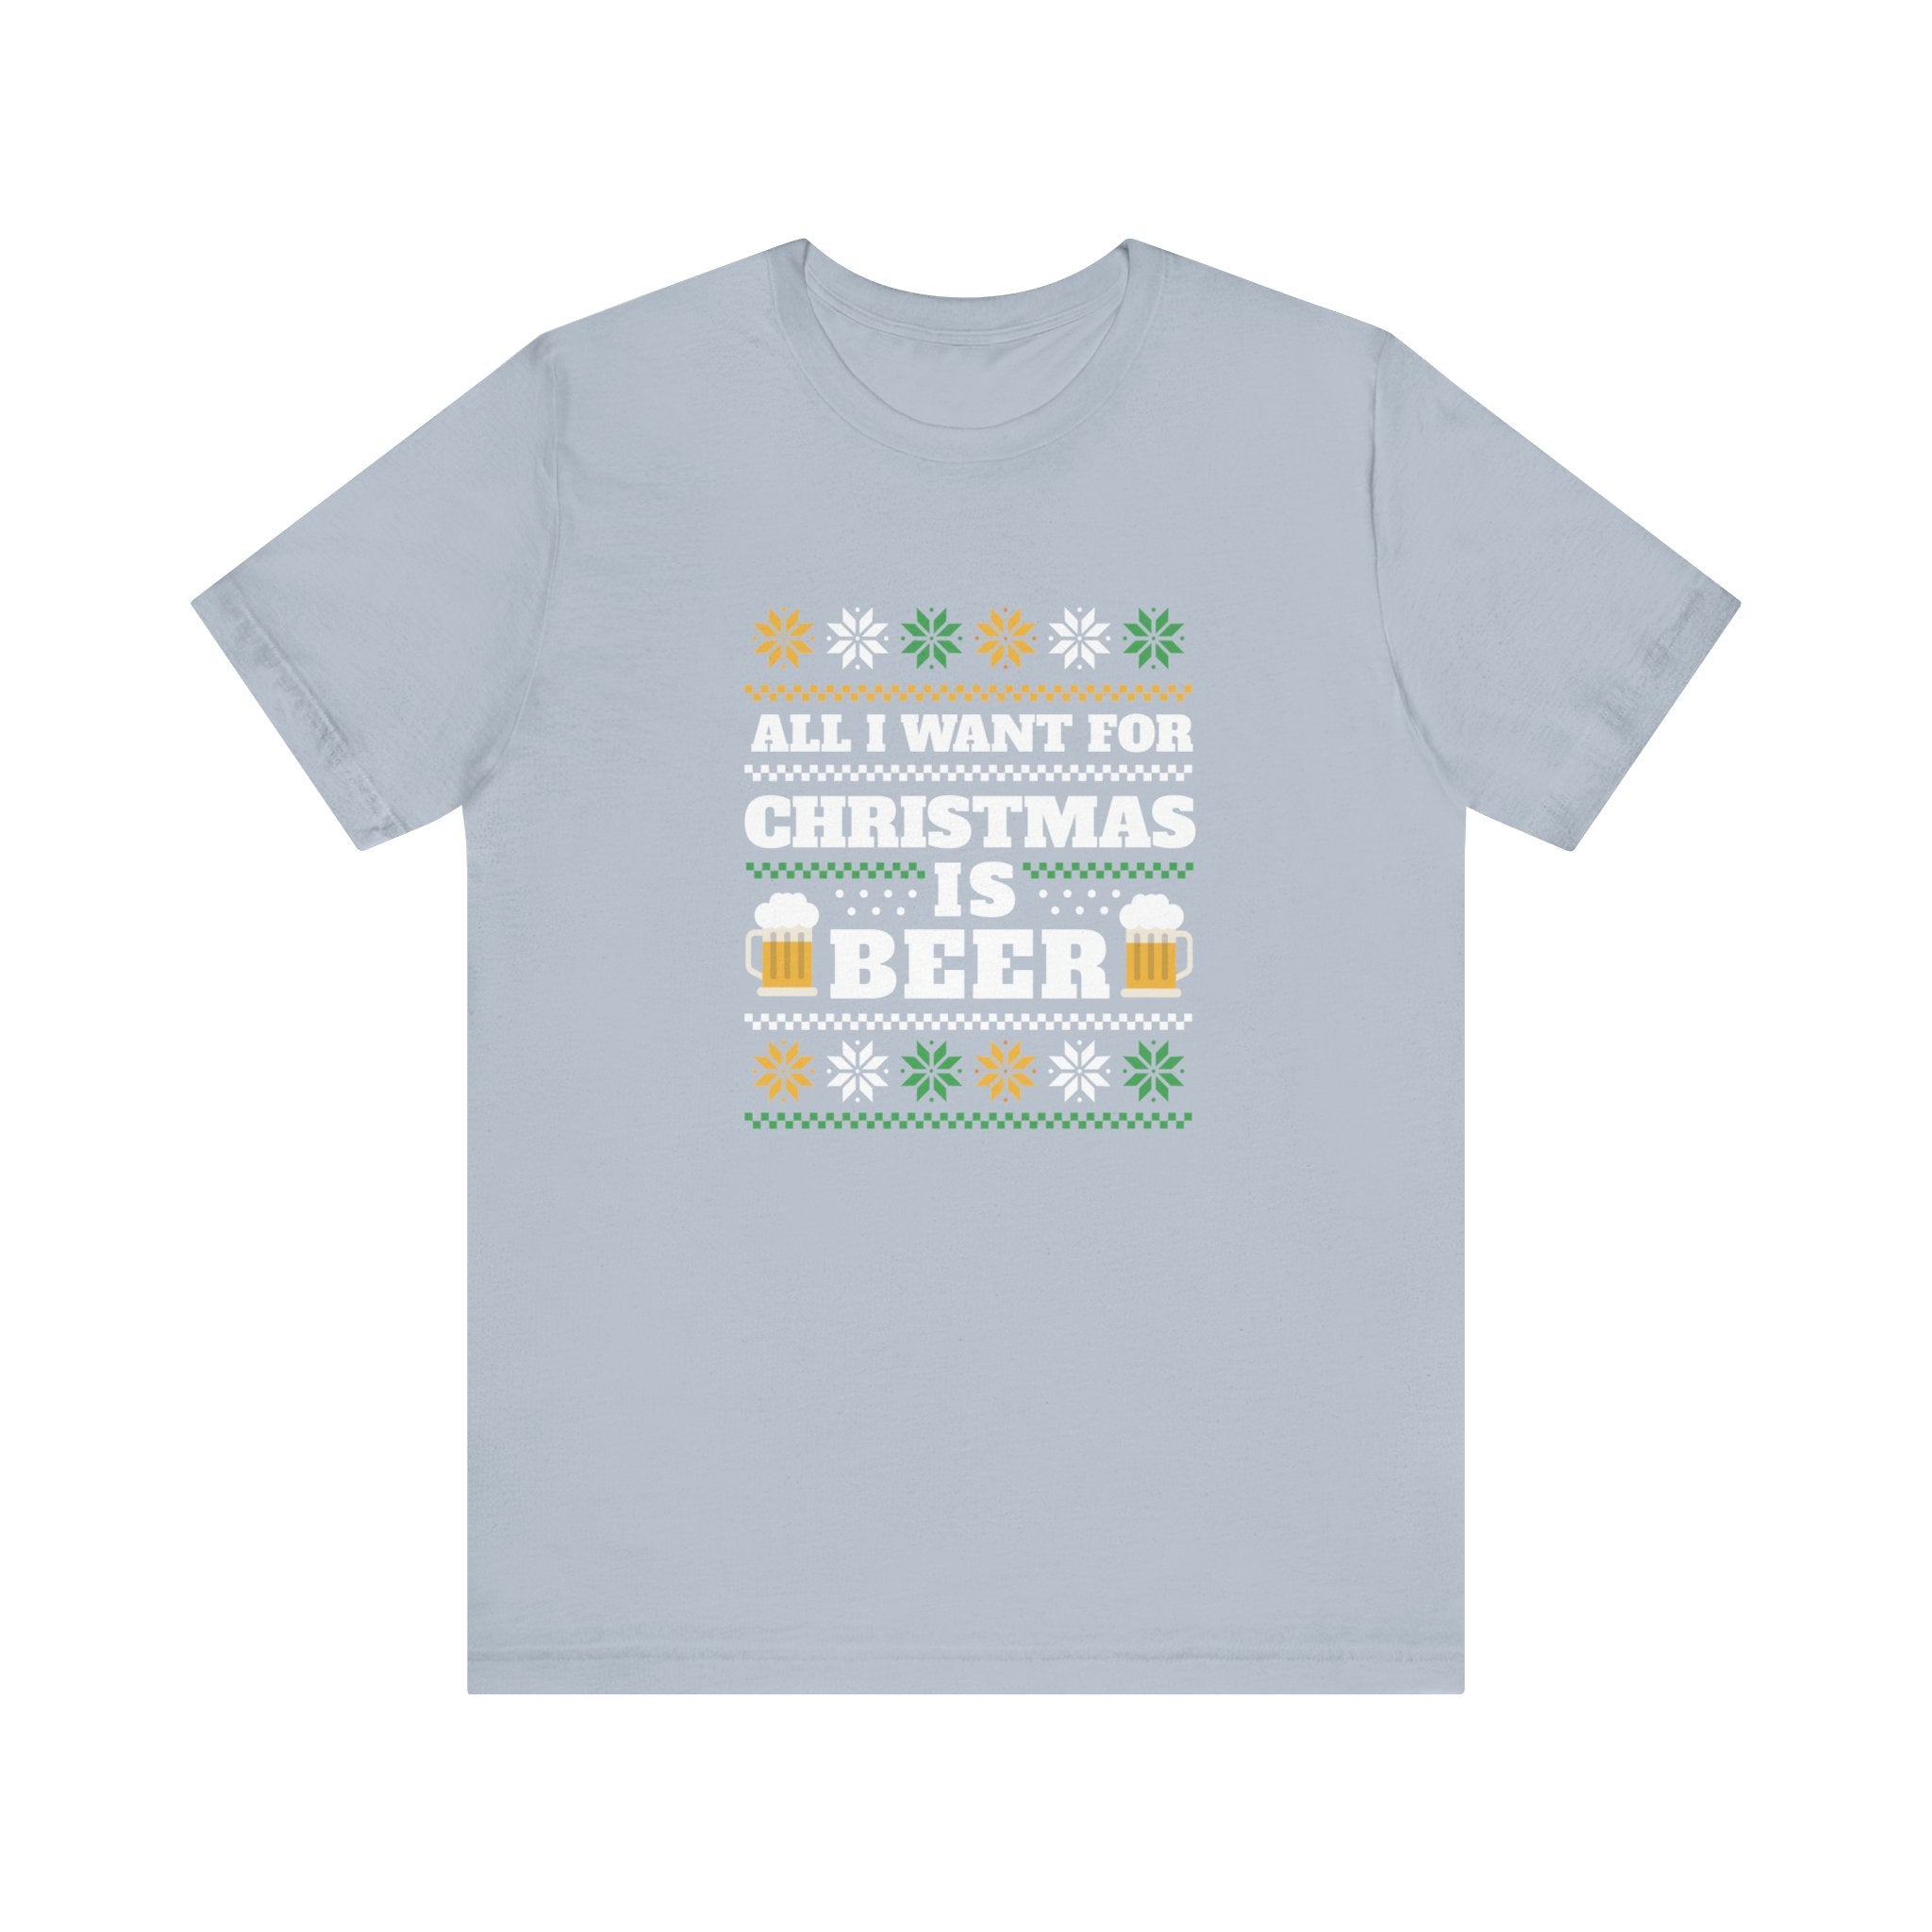 A light gray cotton T-shirt featuring the text "All I Want for Christmas is Beer" with decorative elements and images of beer mugs, perfect for those looking to sport a festive Beer Ugly Sweater - T-Shirt vibe.